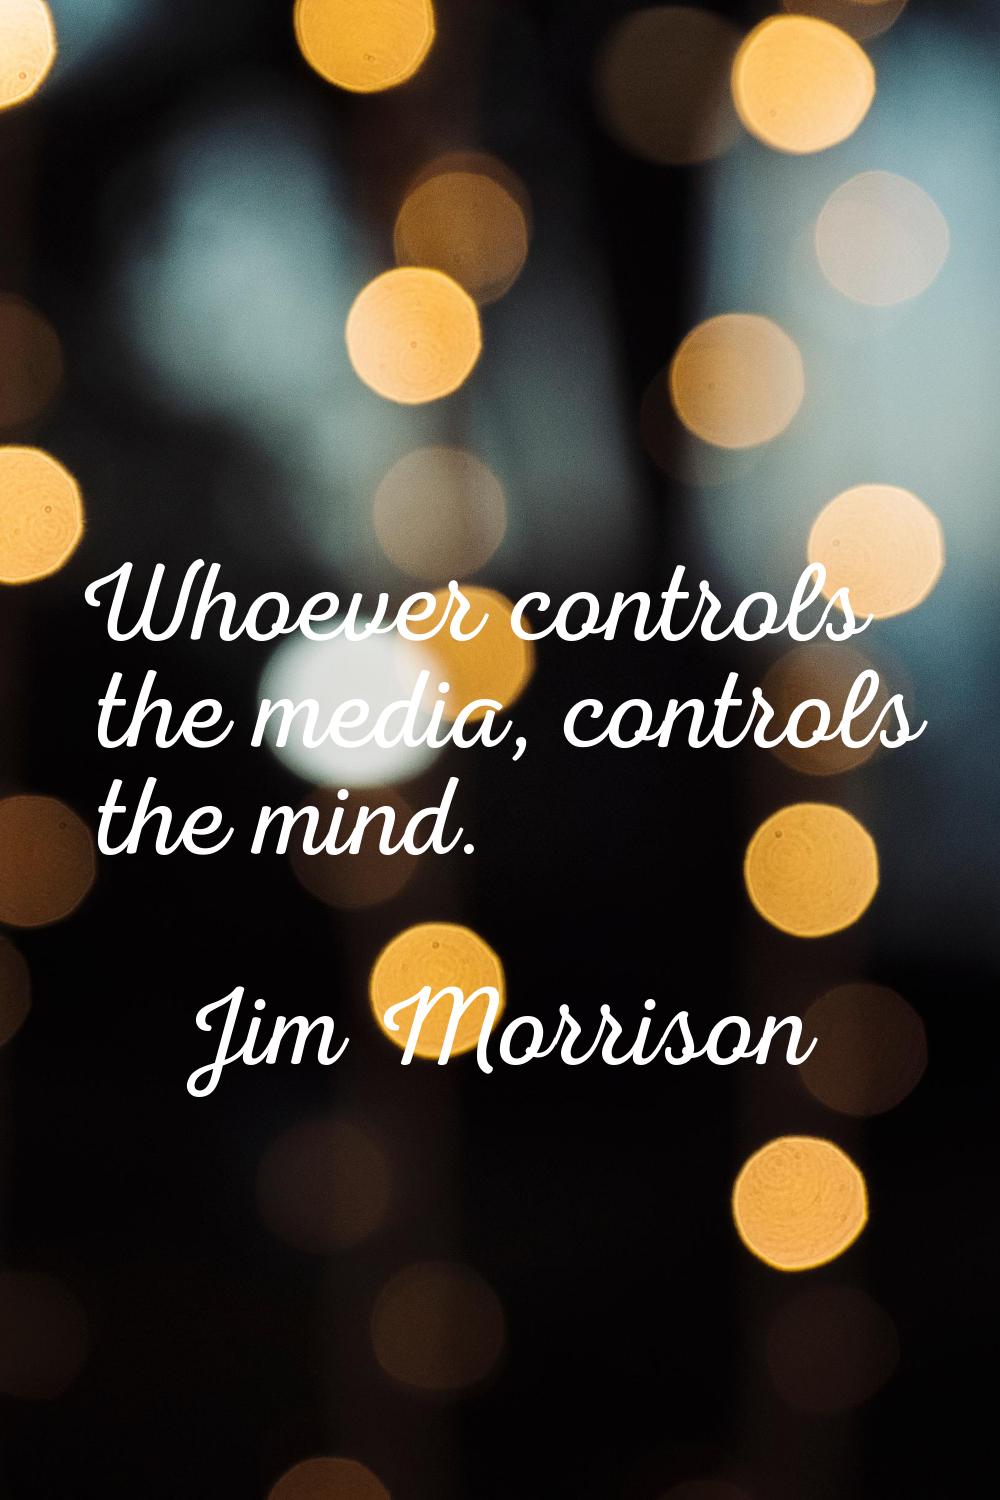 Whoever controls the media, controls the mind.